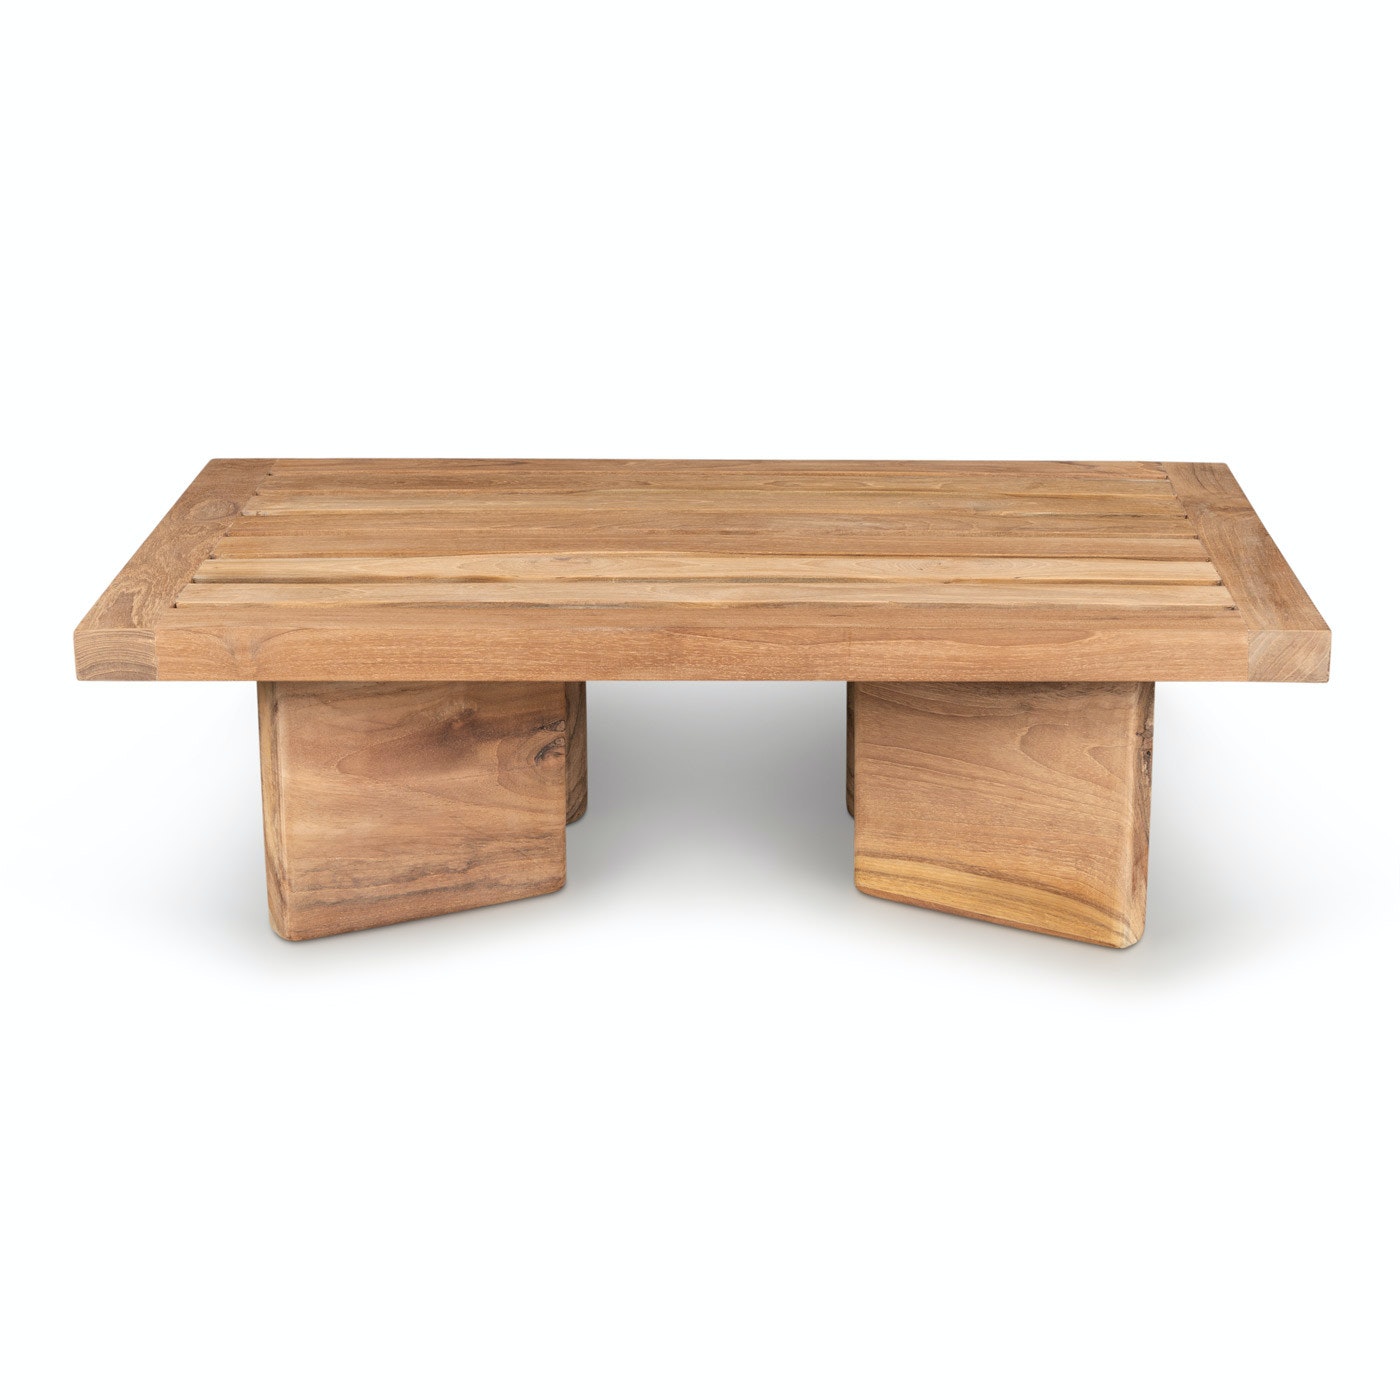 Teak Coffee Table - Small - THAT COOL LIVING